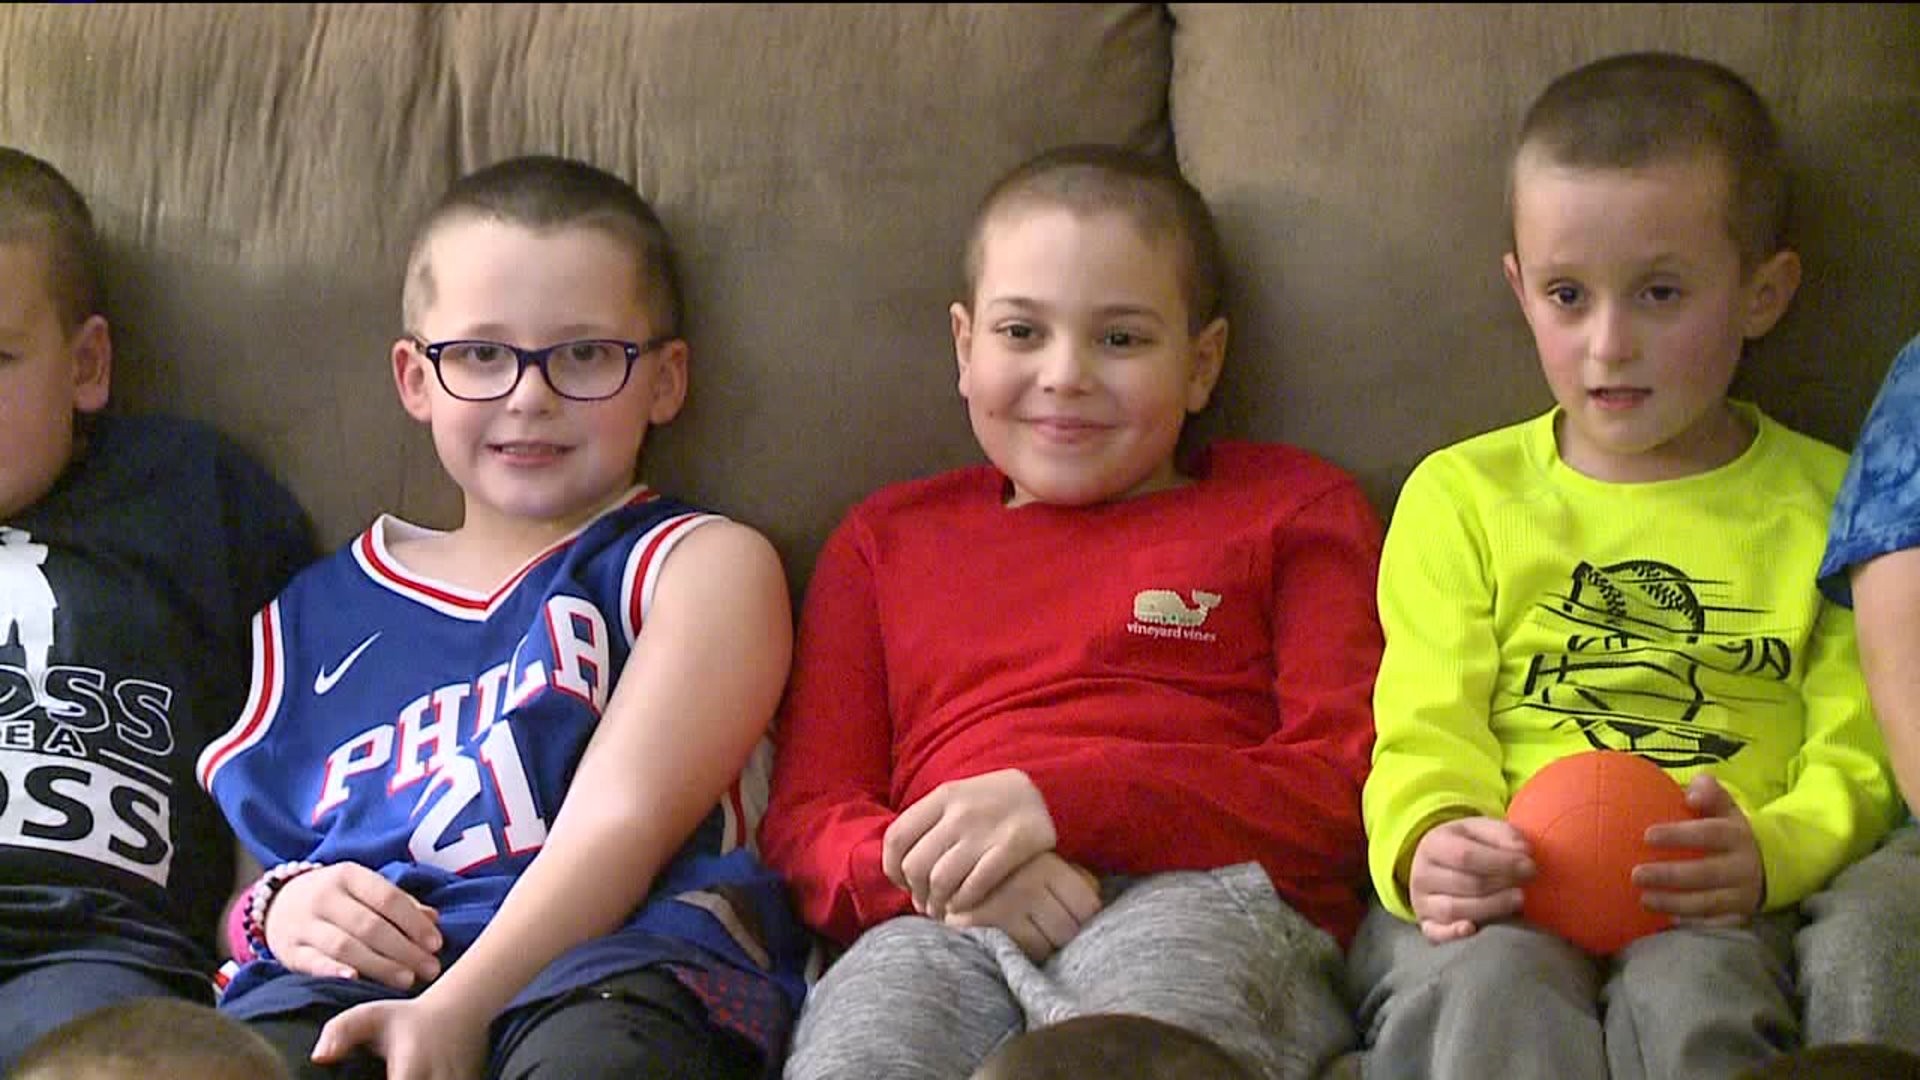 Second Graders in Dunmore Shave their Heads with Friend Diagnosed with Leukemia